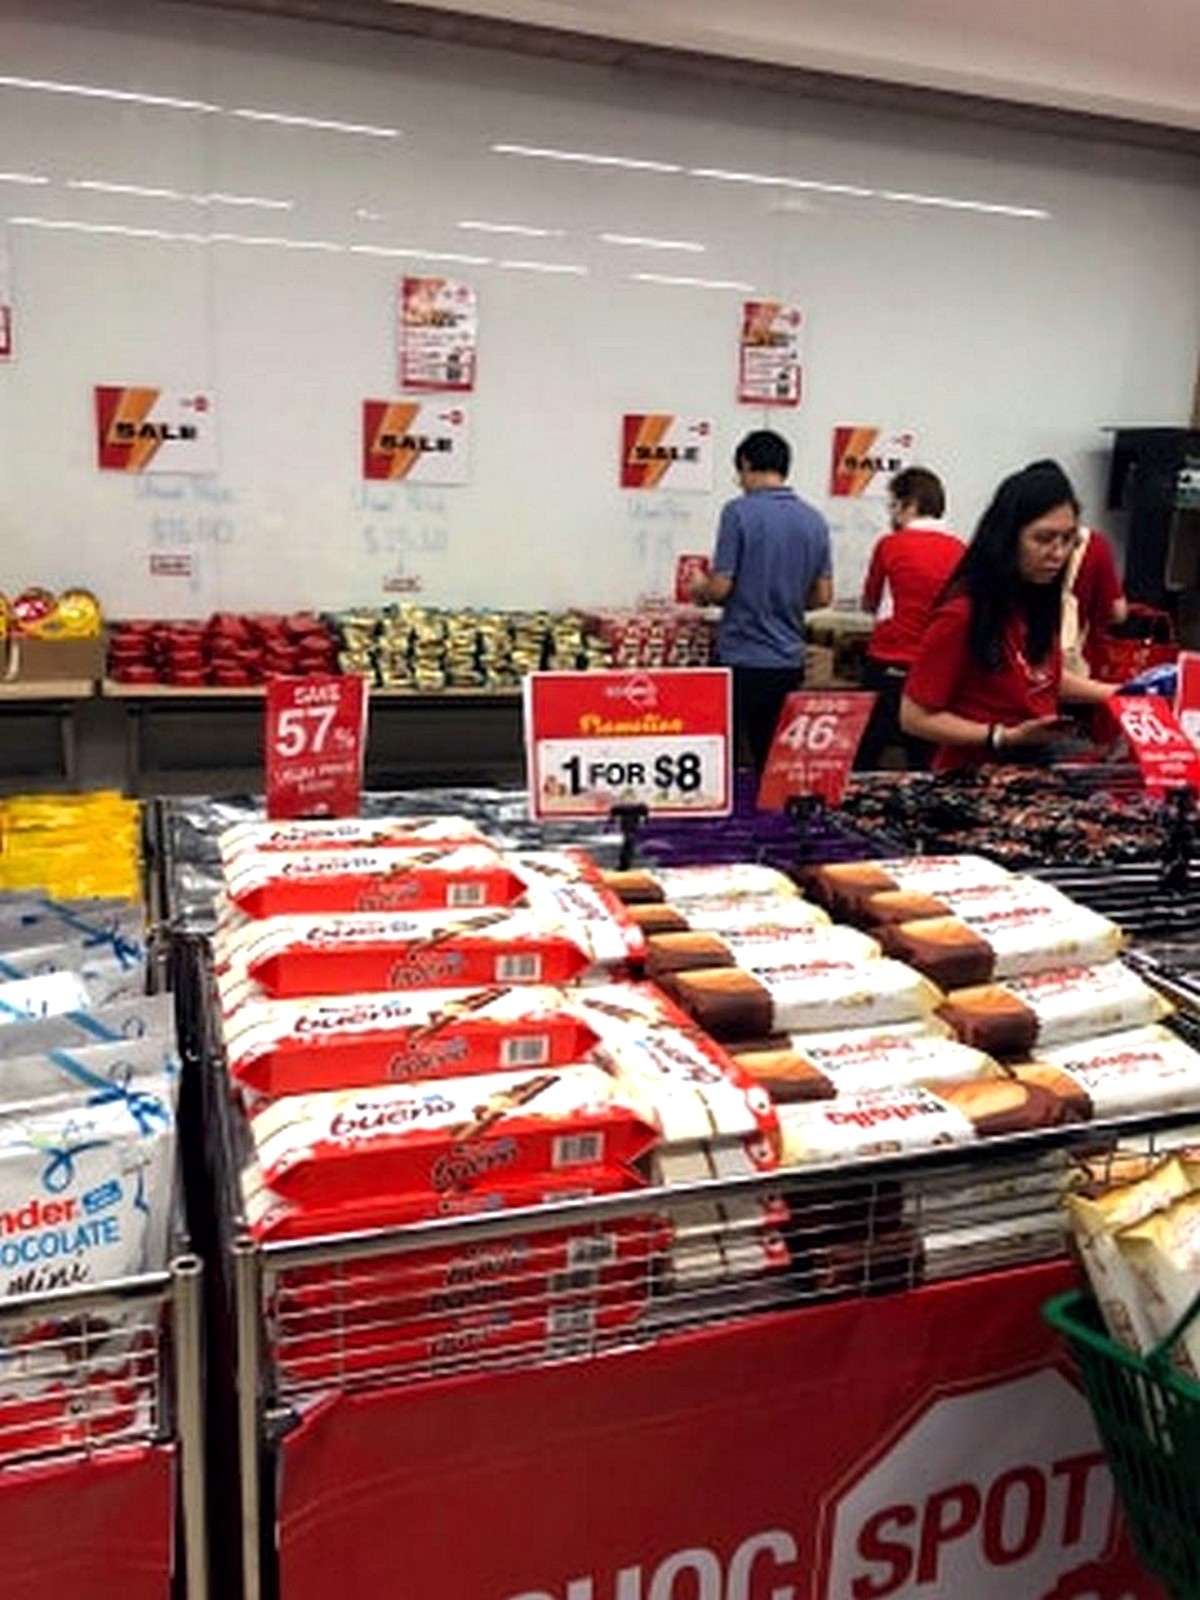 Choc-Spot-Warehouse-Sale-Singapore-2020-Clearance-Chocolate-Candy-Discounts-004 24 Jul-2 Aug 2020: Choc Spot Warehouse Sale! Up to 80% off Chocolates, Sweets, Chips, Biscuits!